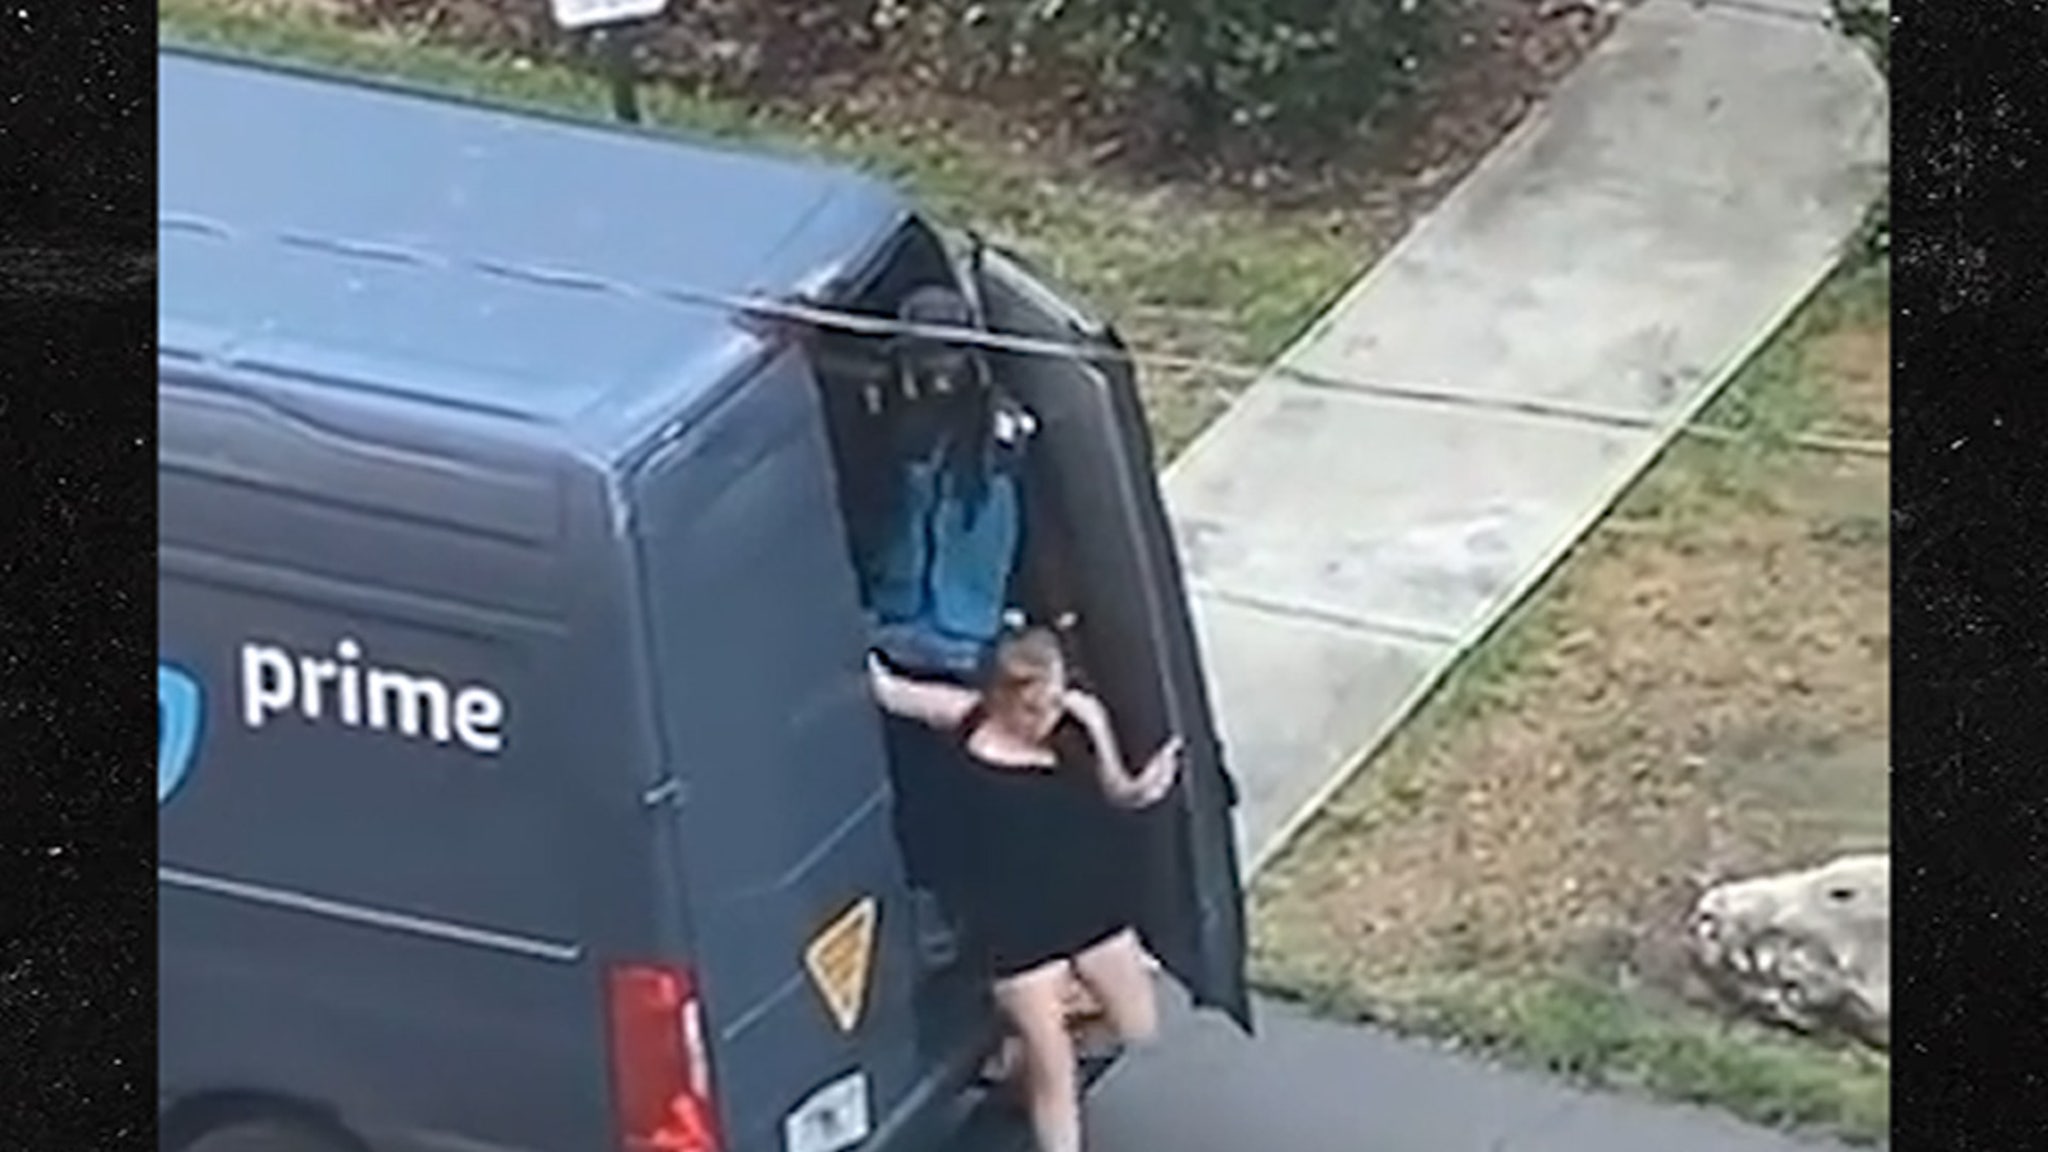 Amazon Driver Fired After Video of Woman Exiting Back of Truck Goes Viral